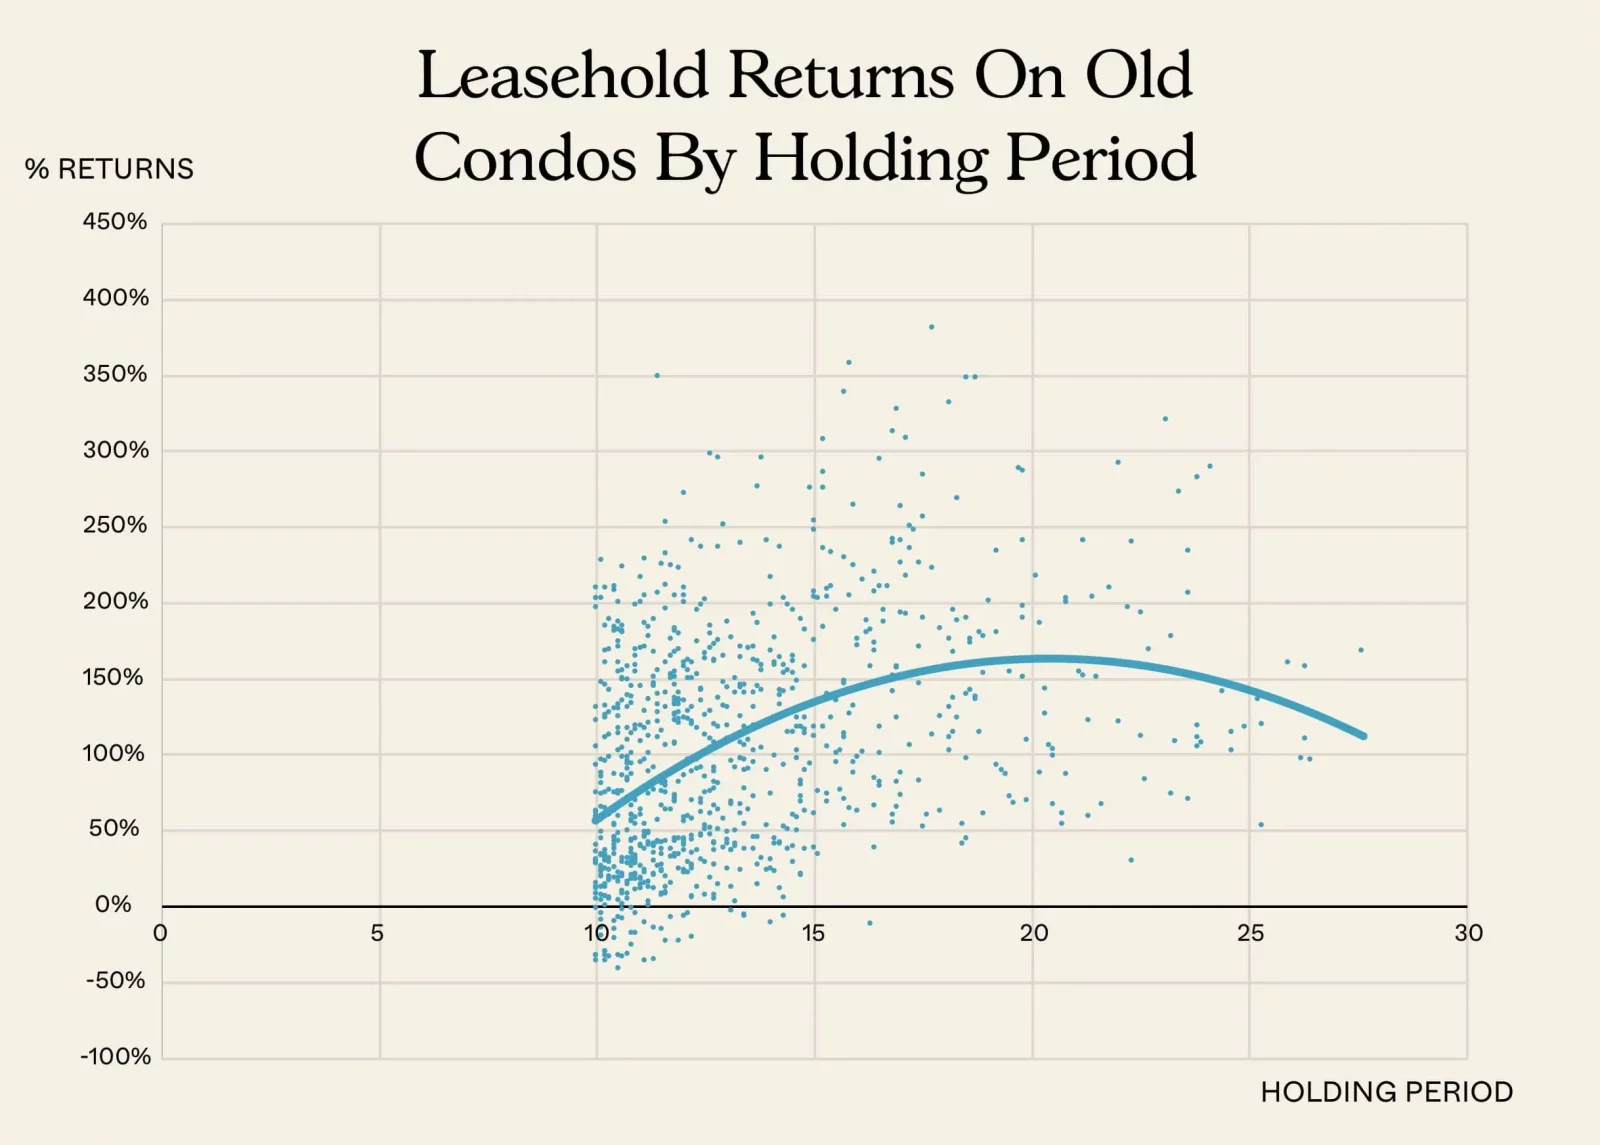 Leasehold Returns On Old Condos By Holding Period